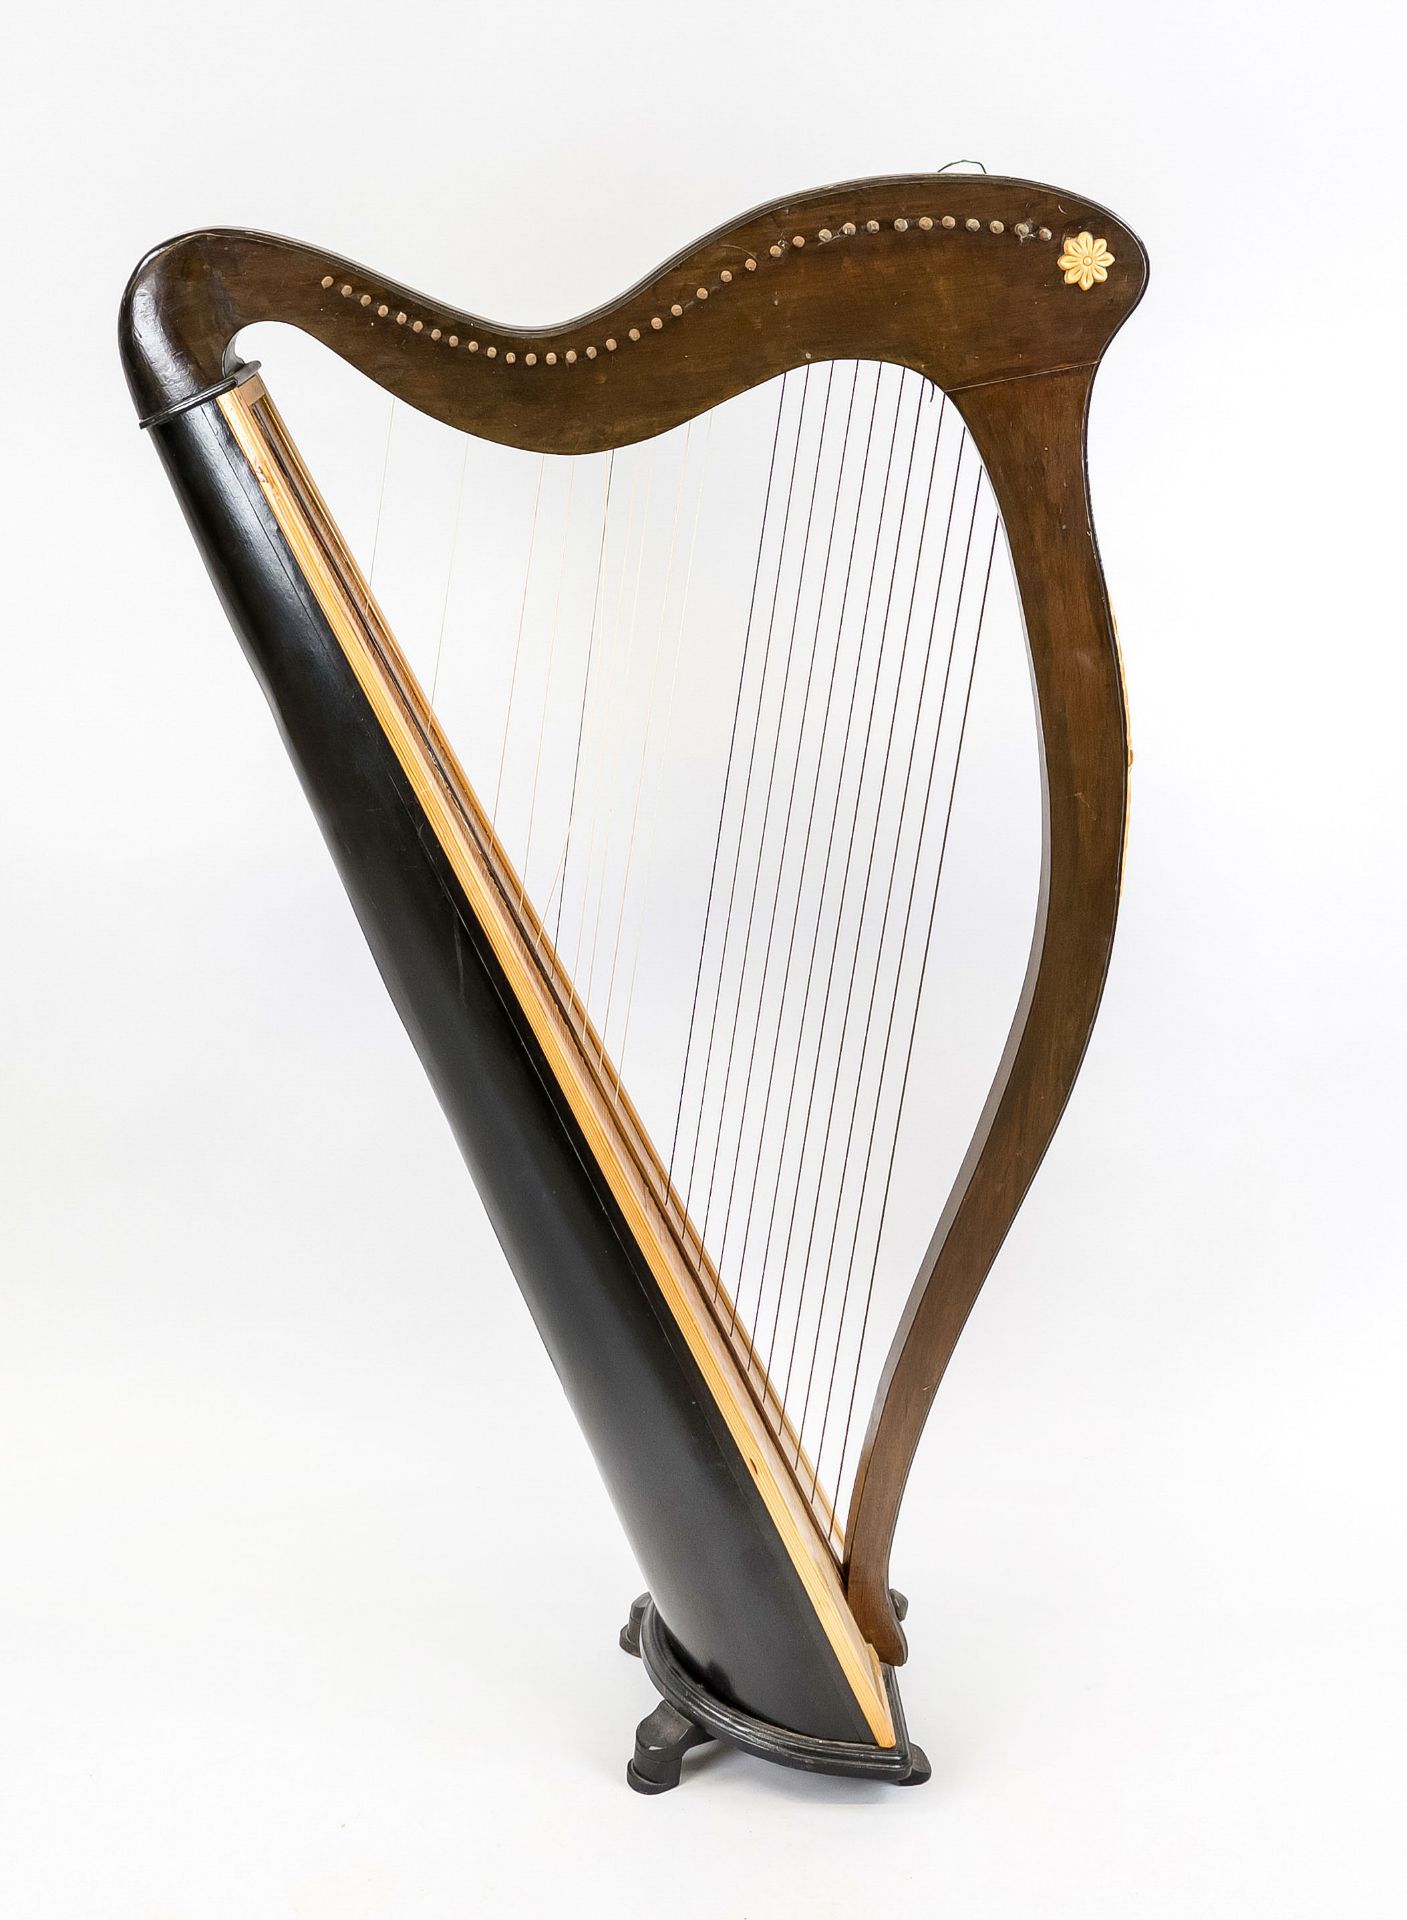 Harp, probably 1st half 20th century, various woods, stringing defective, rubbed & slightly